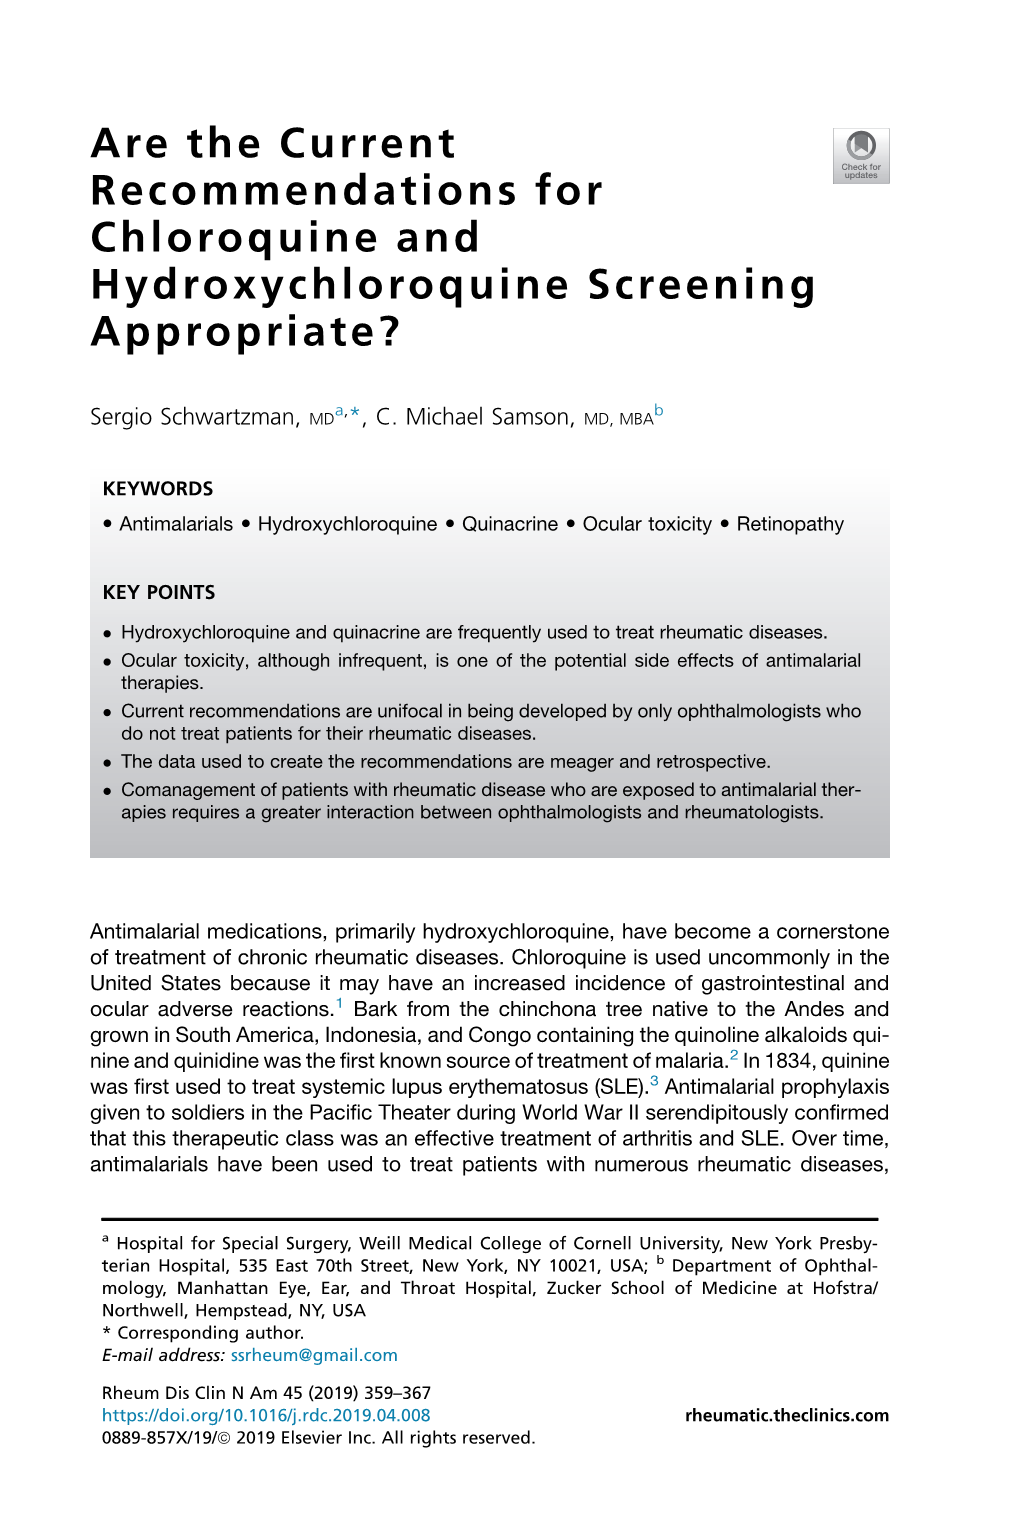 Are the Current Recommendations for Chloroquine and Hydroxychloroquine Screening Appropriate?